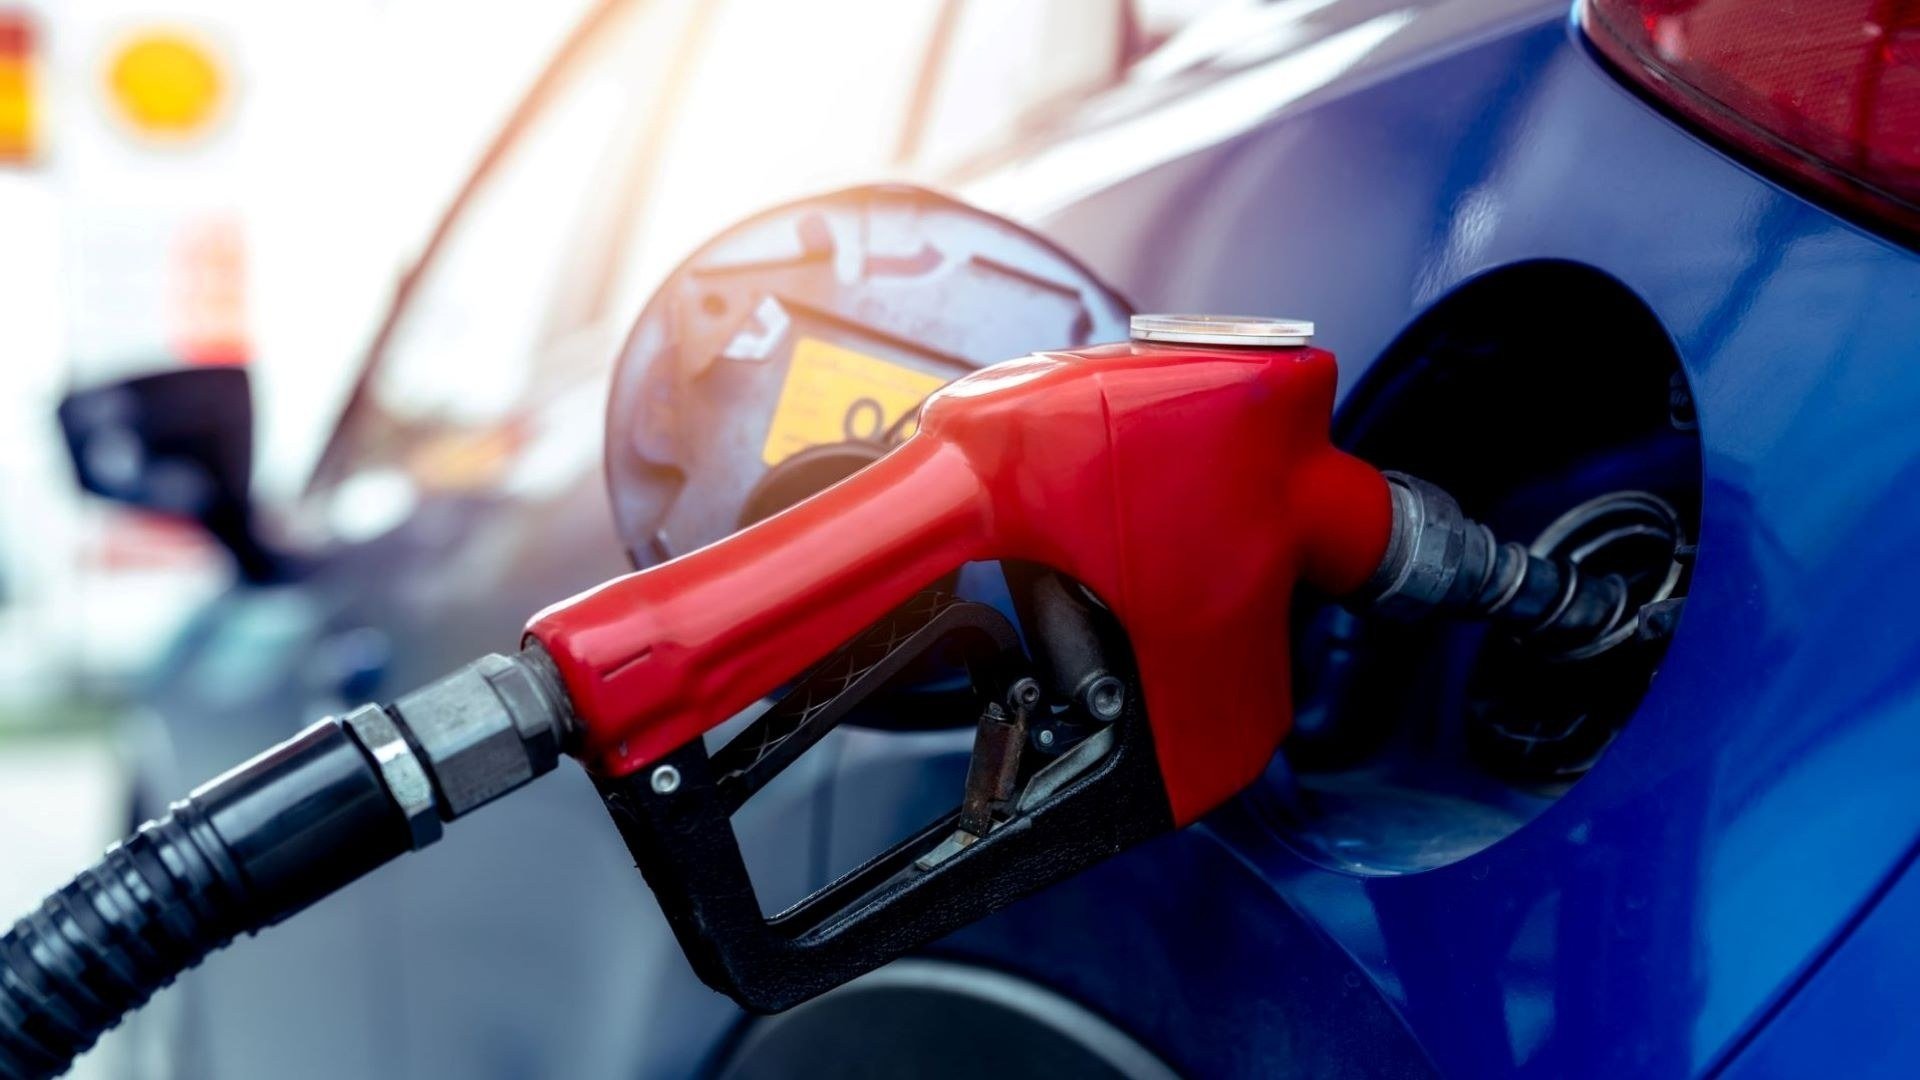 How to save Fuel during the petrol shortage